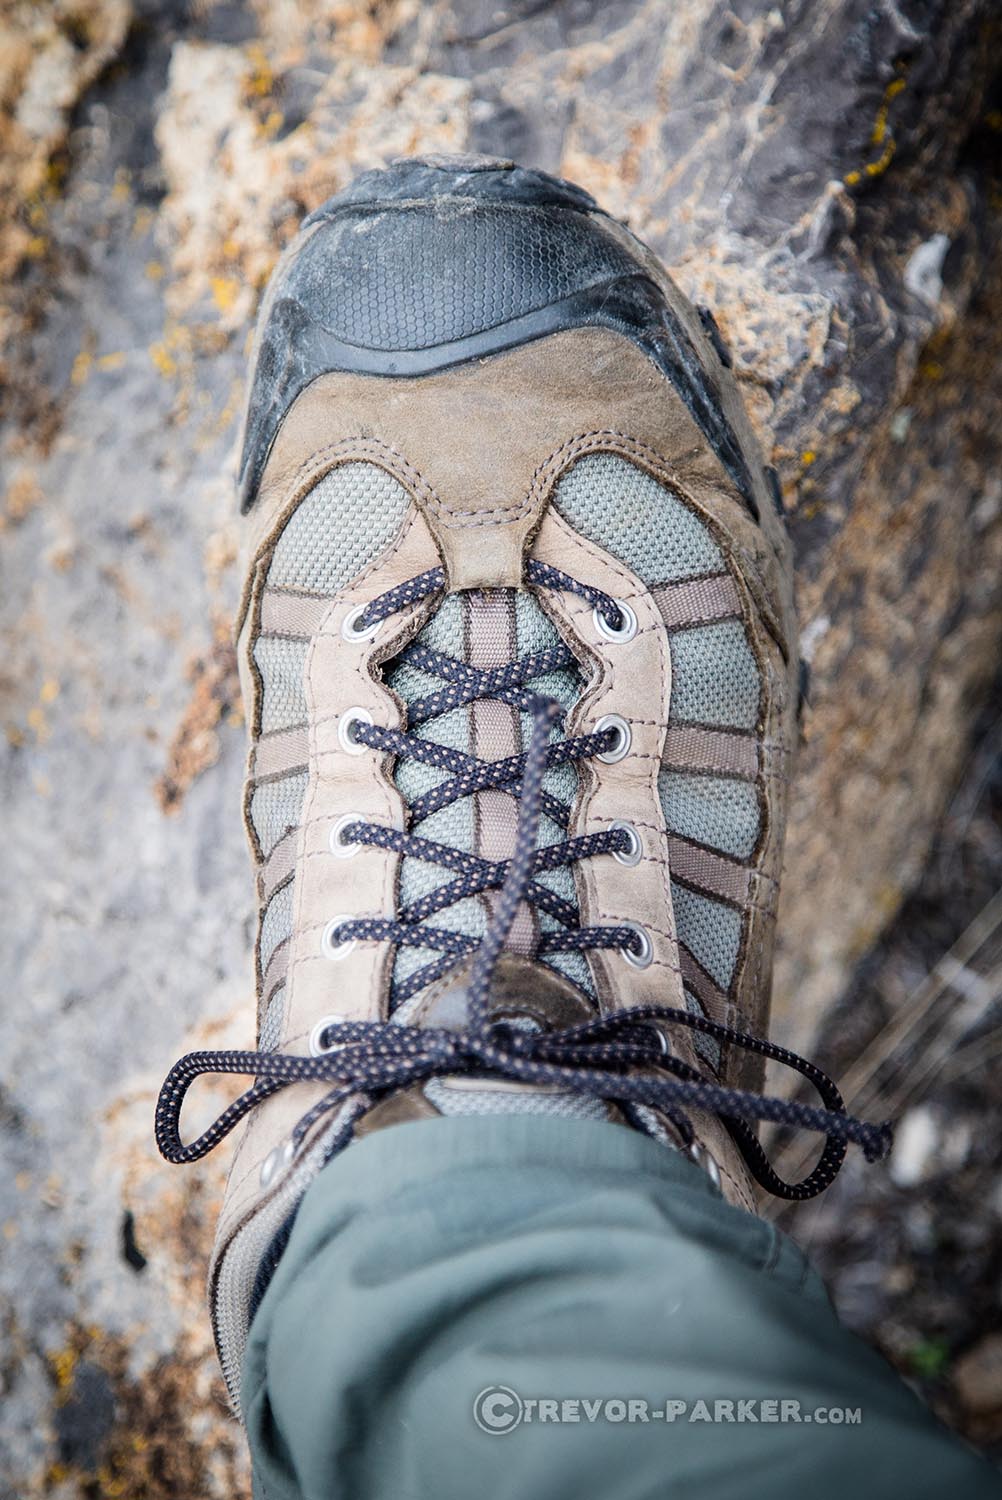 Shoes: Oboz Tamarack Bdry Review | The 